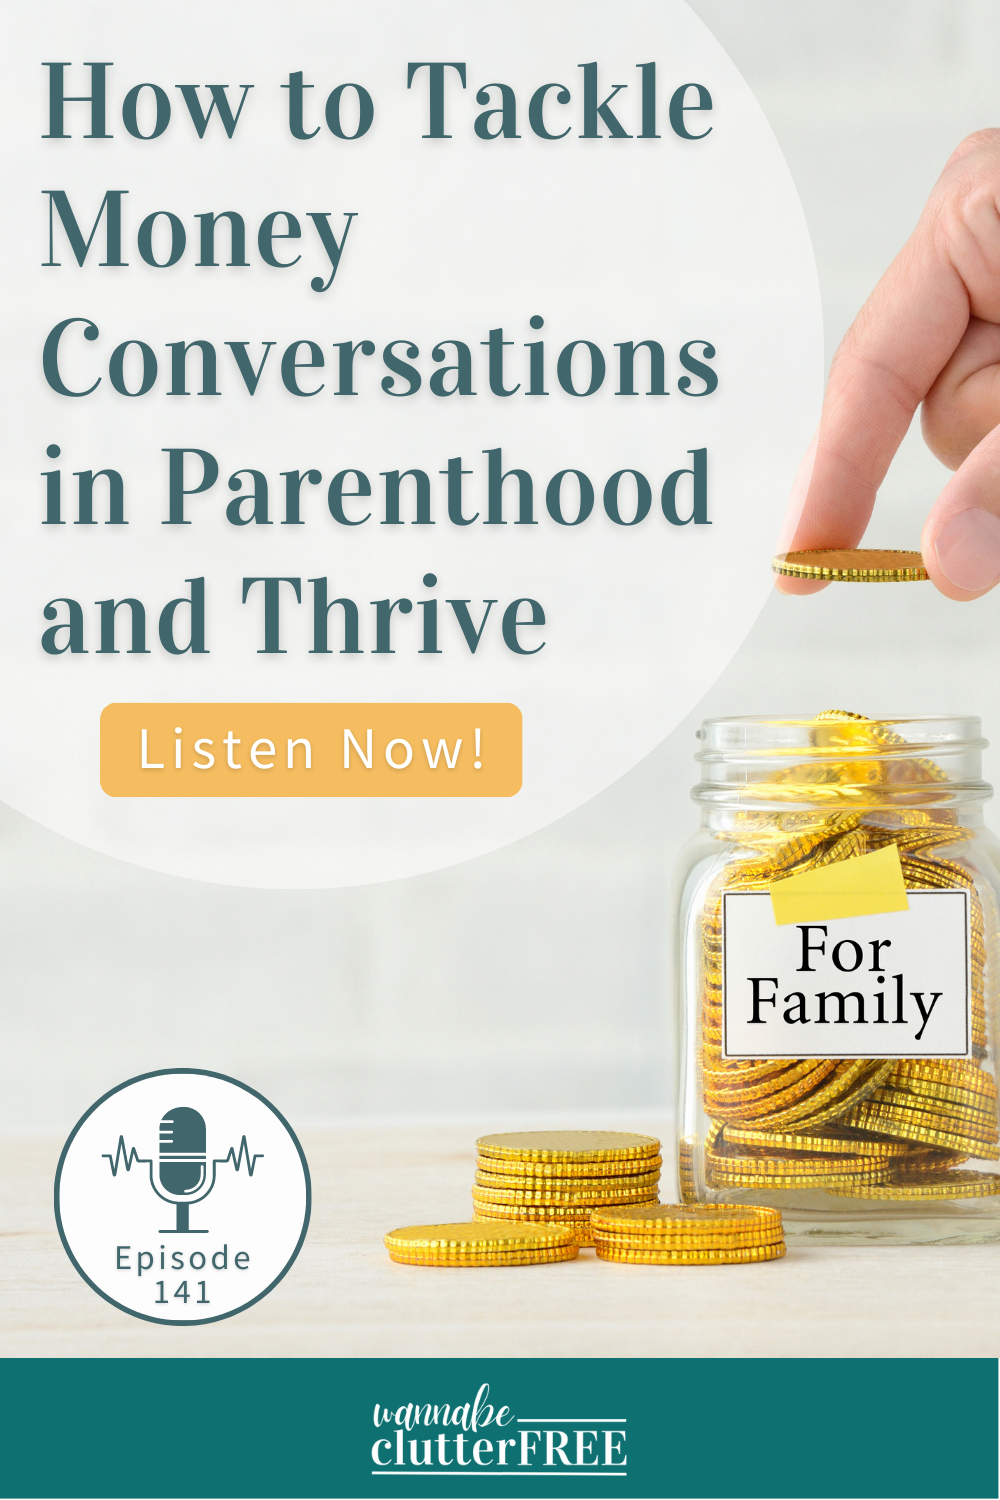 How to Tackle Money Conversations in Parenthood and Thrive